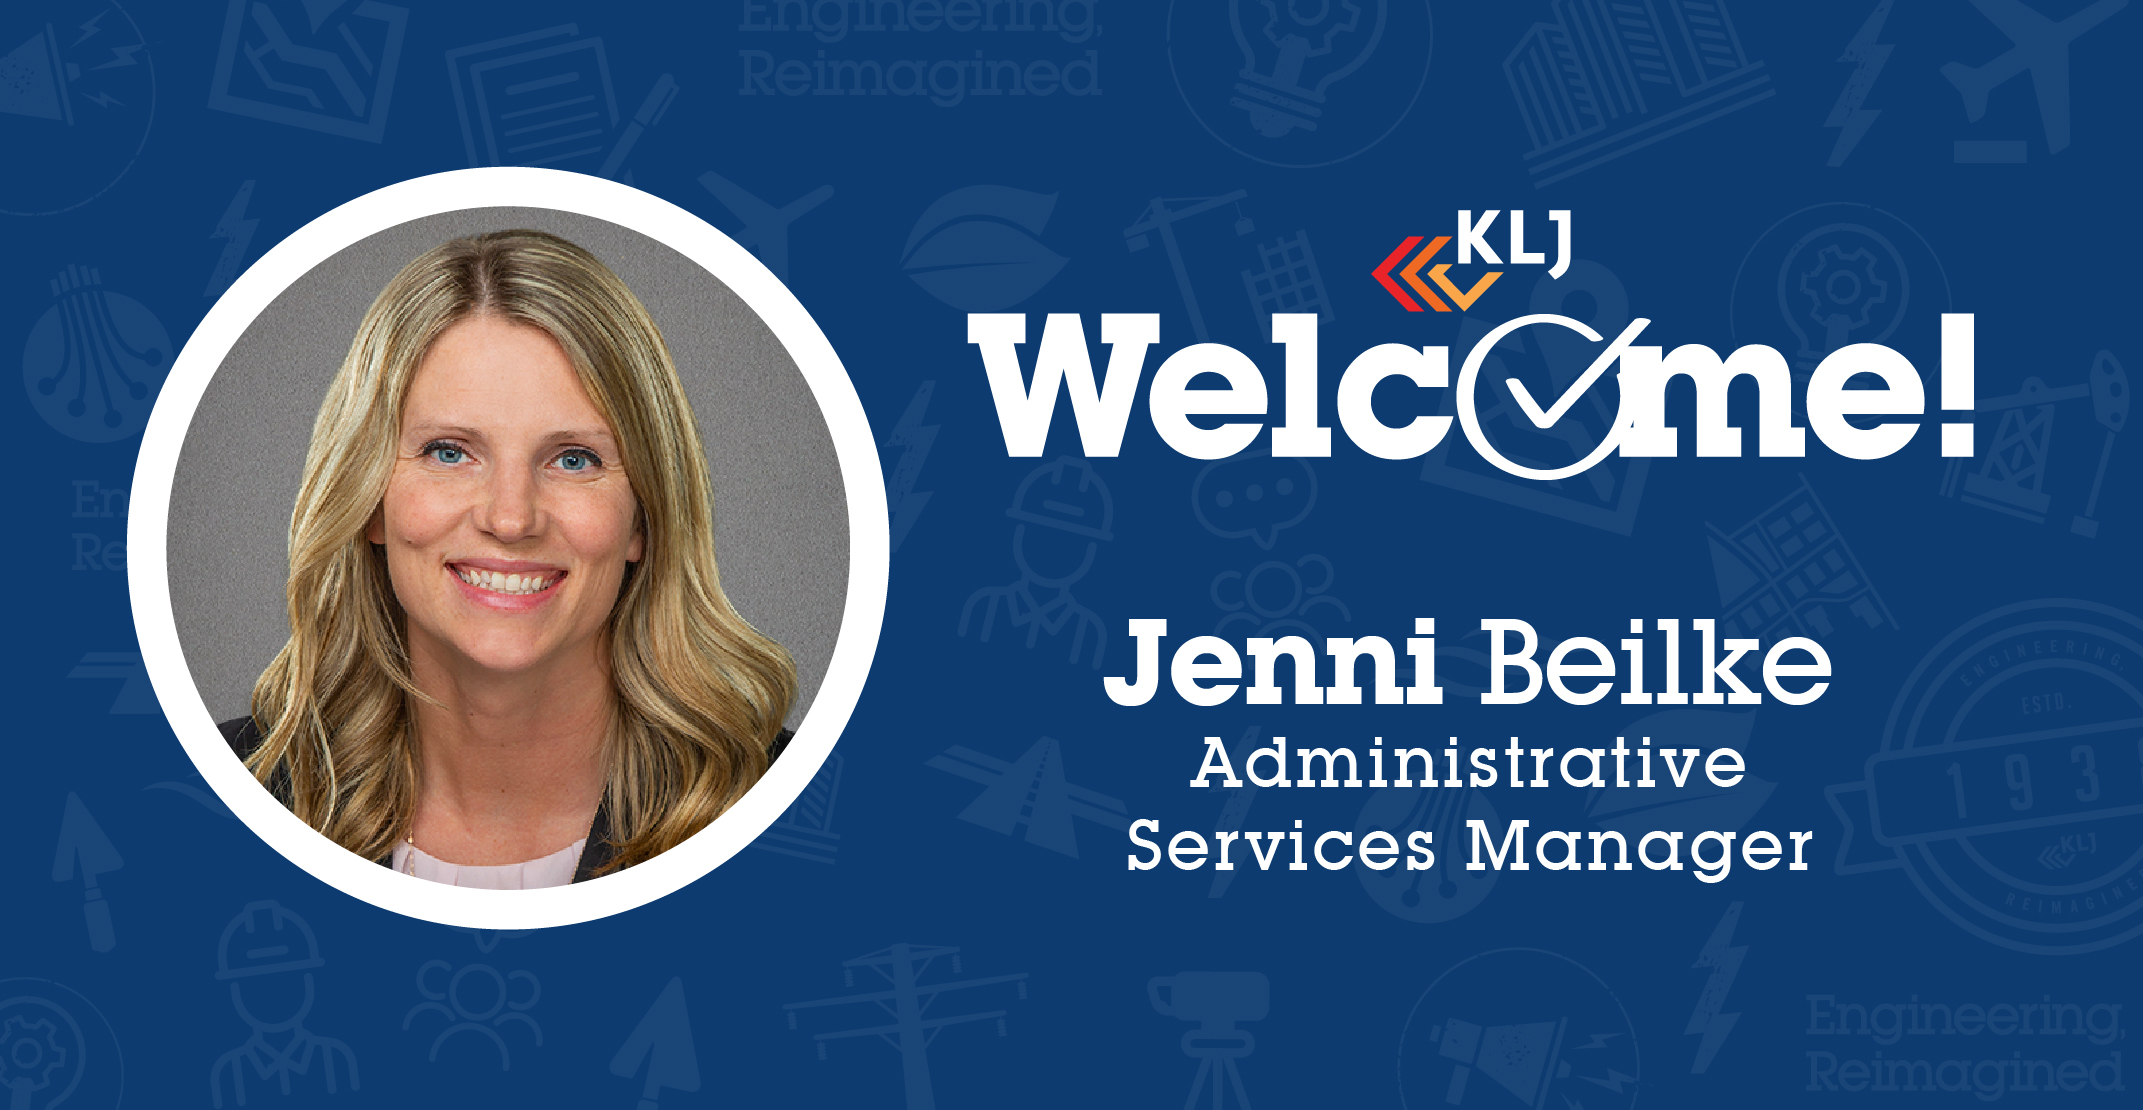 Beilke Joins KLJ as an Administrative Services Manager